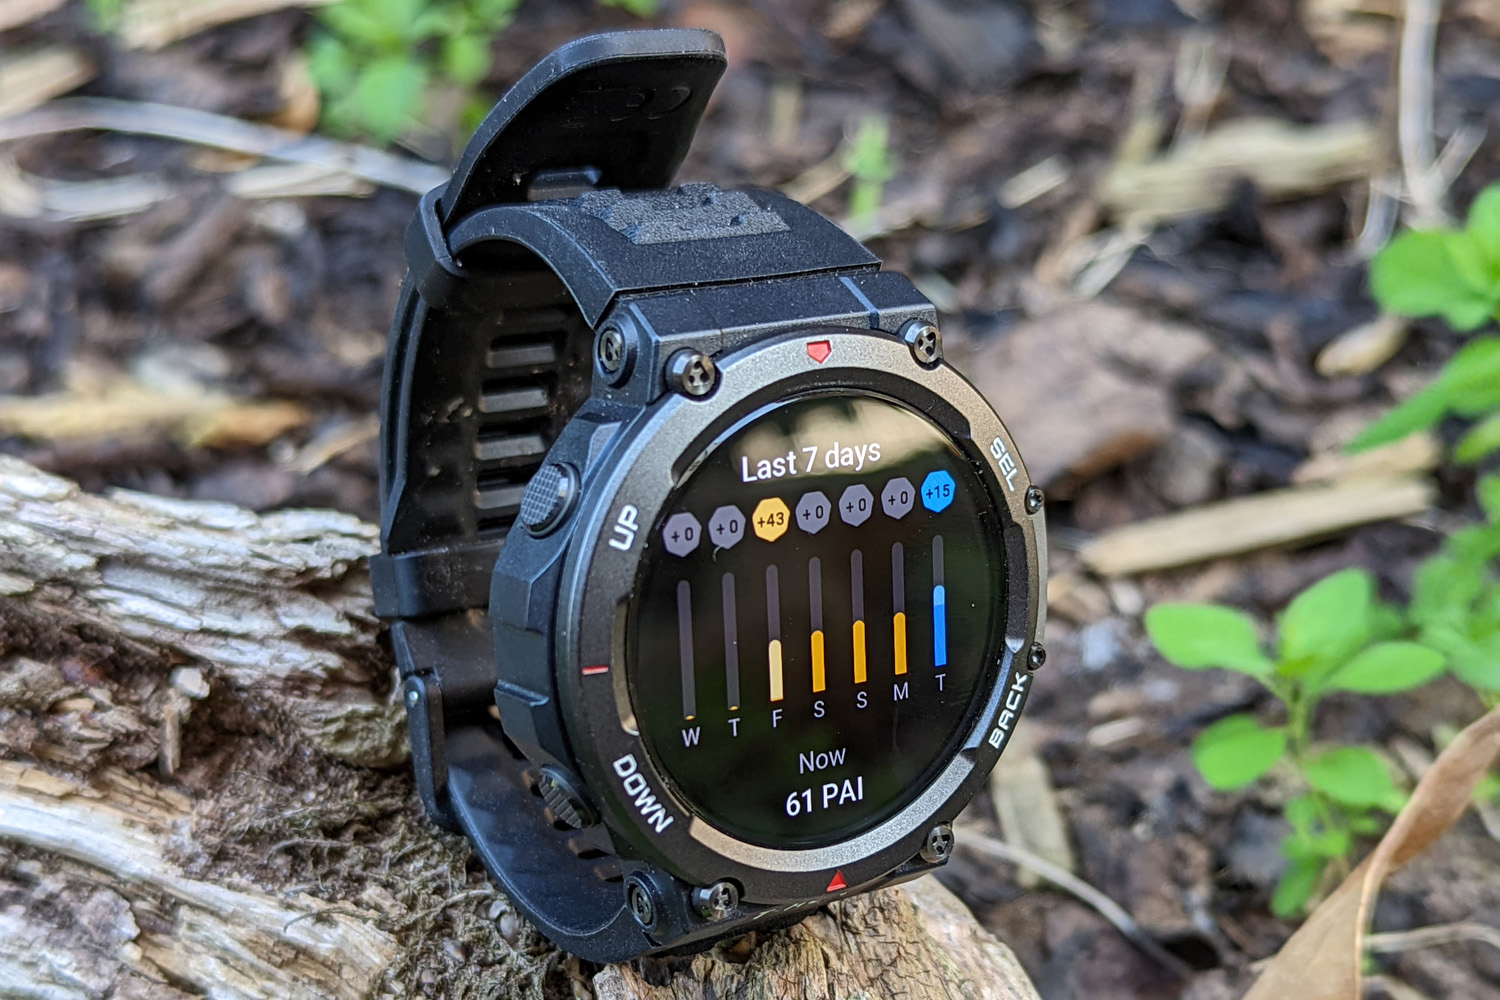 AMAZFIT T-REX 2 Smartwatch: THE REVIEW -- Is this my favourite